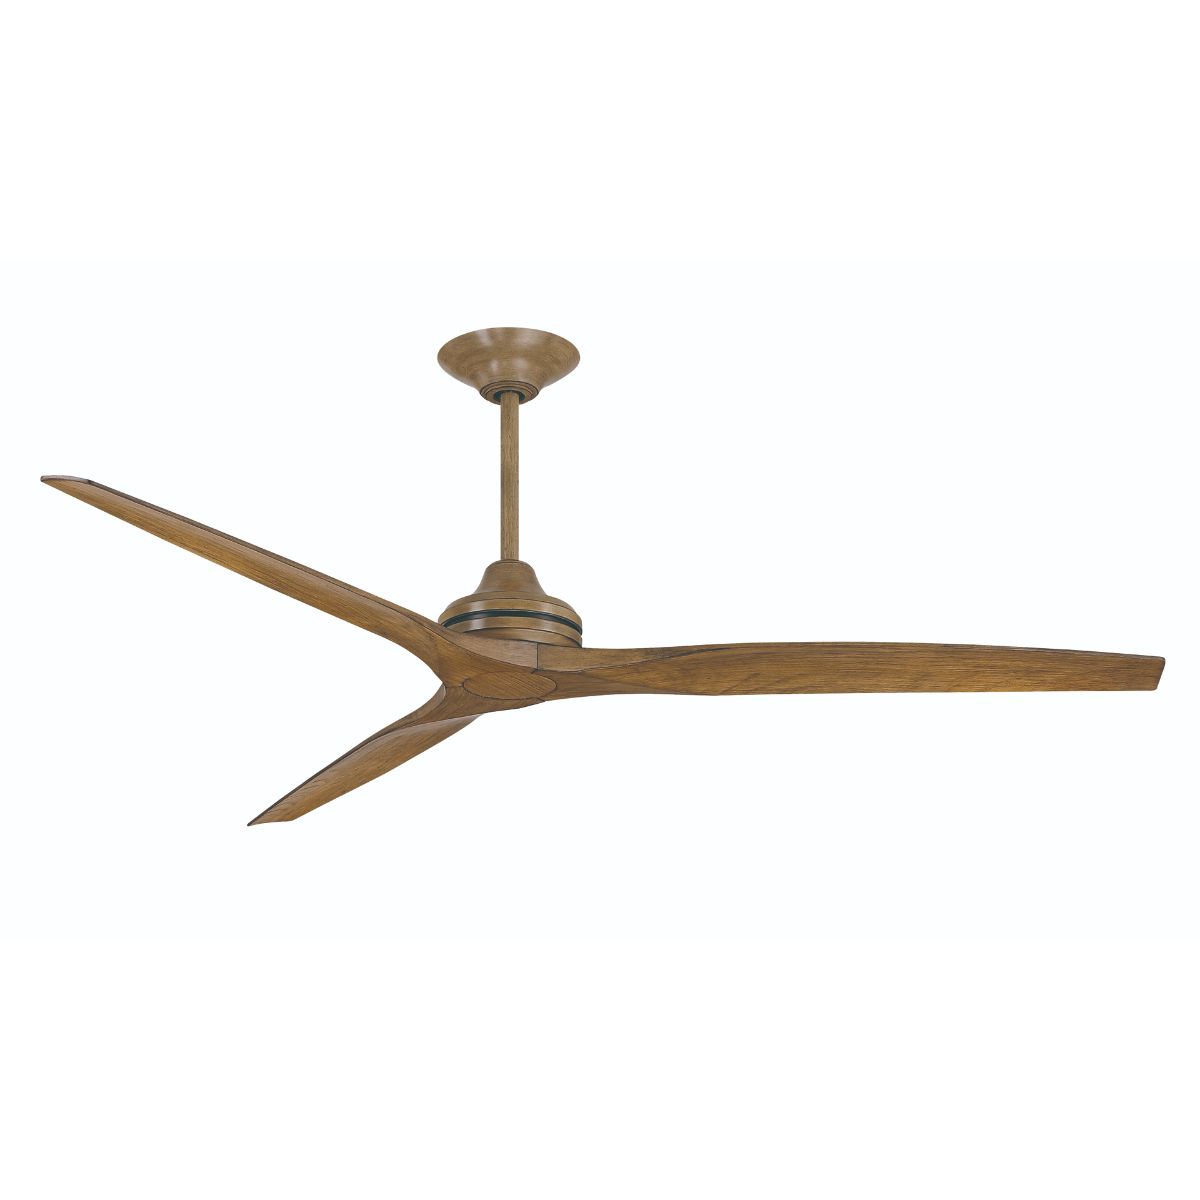 Spitfire DC Outdoor Ceiling Fan Motor With Remote, Driftwood Finish, Set of 3 Blades Sold Separately